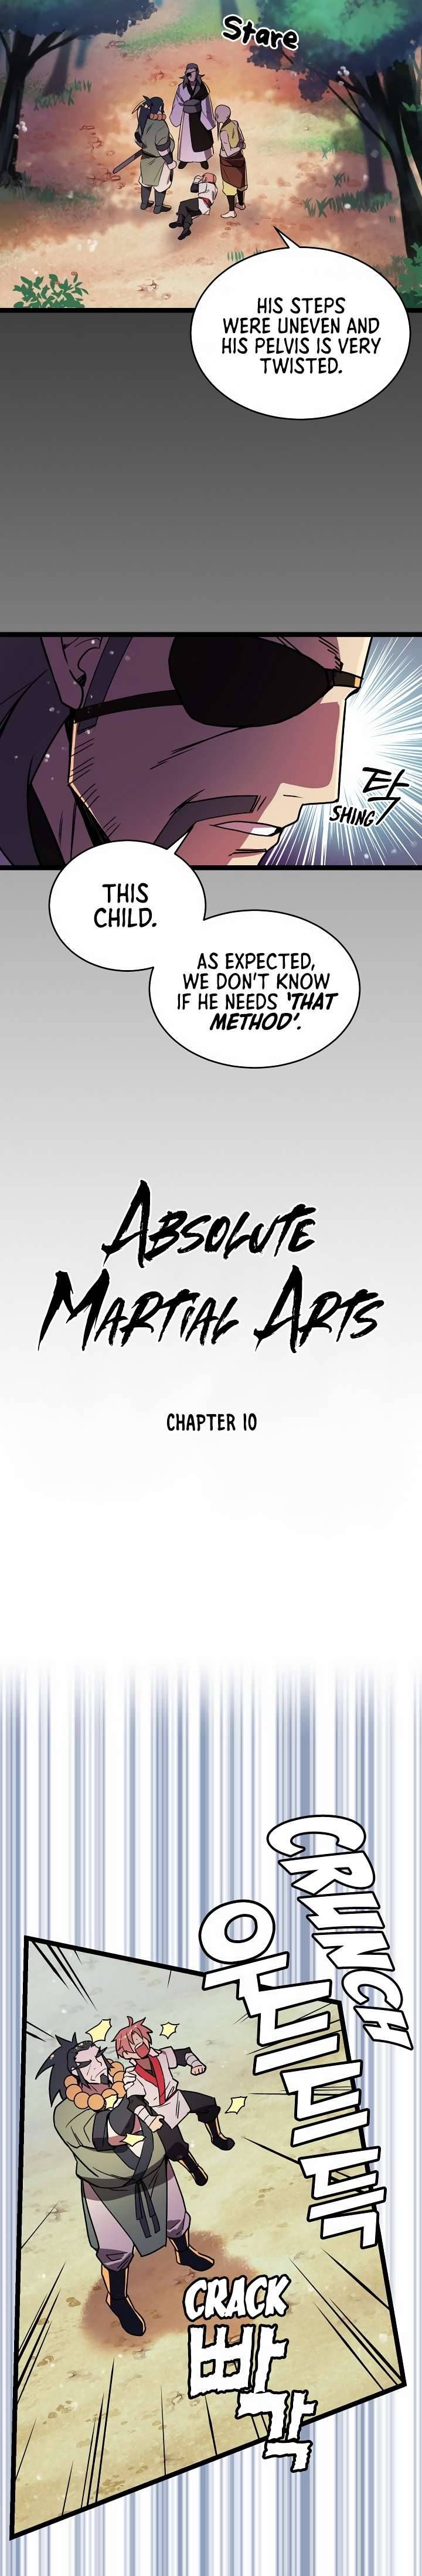 Absolute Martial Arts Chapter 10 page 3